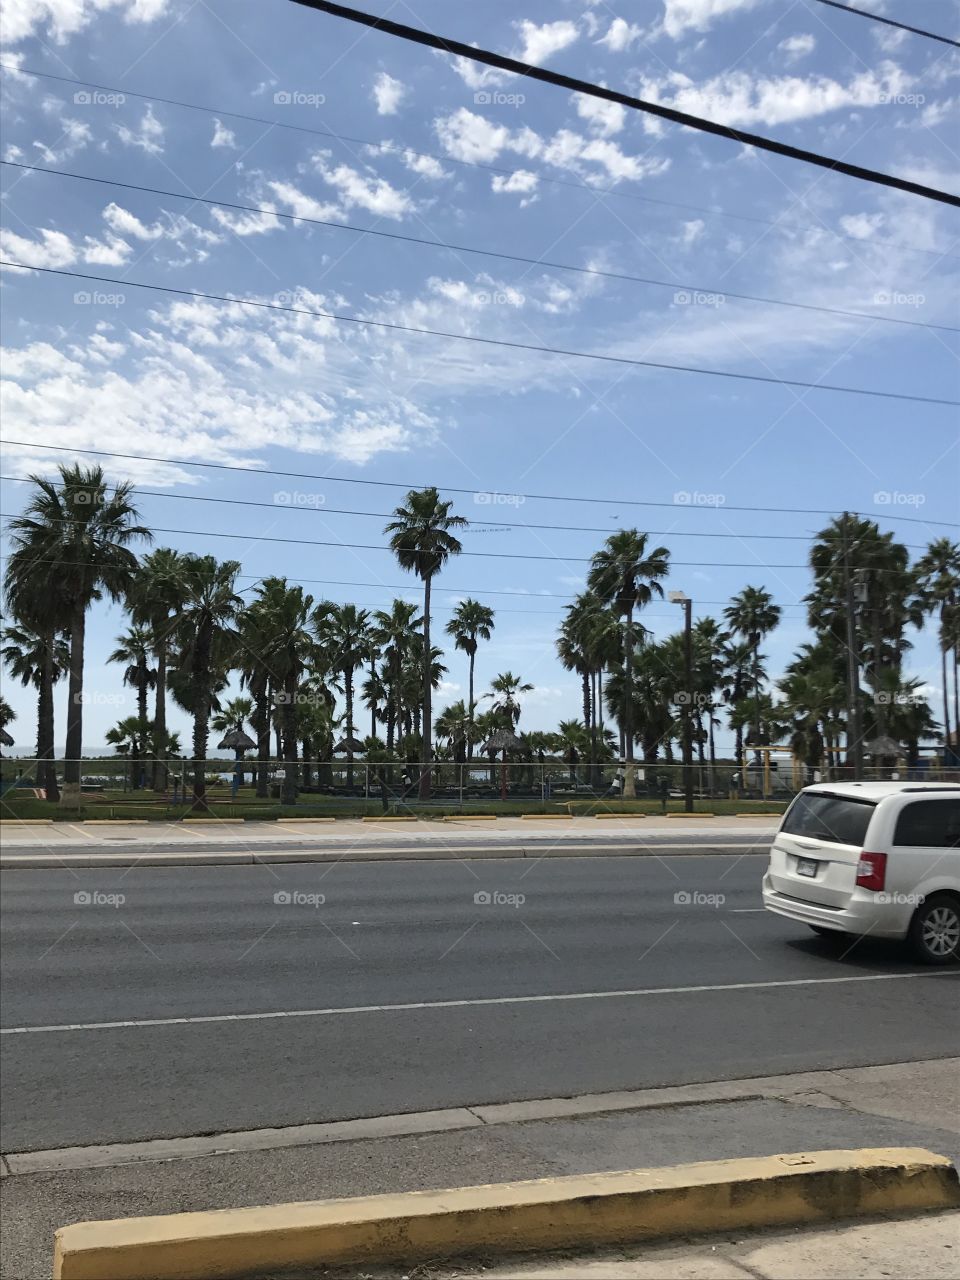 Driving past some beautiful palm Trees in South Padre Island, Texas for Spring Break 2018! 🌴